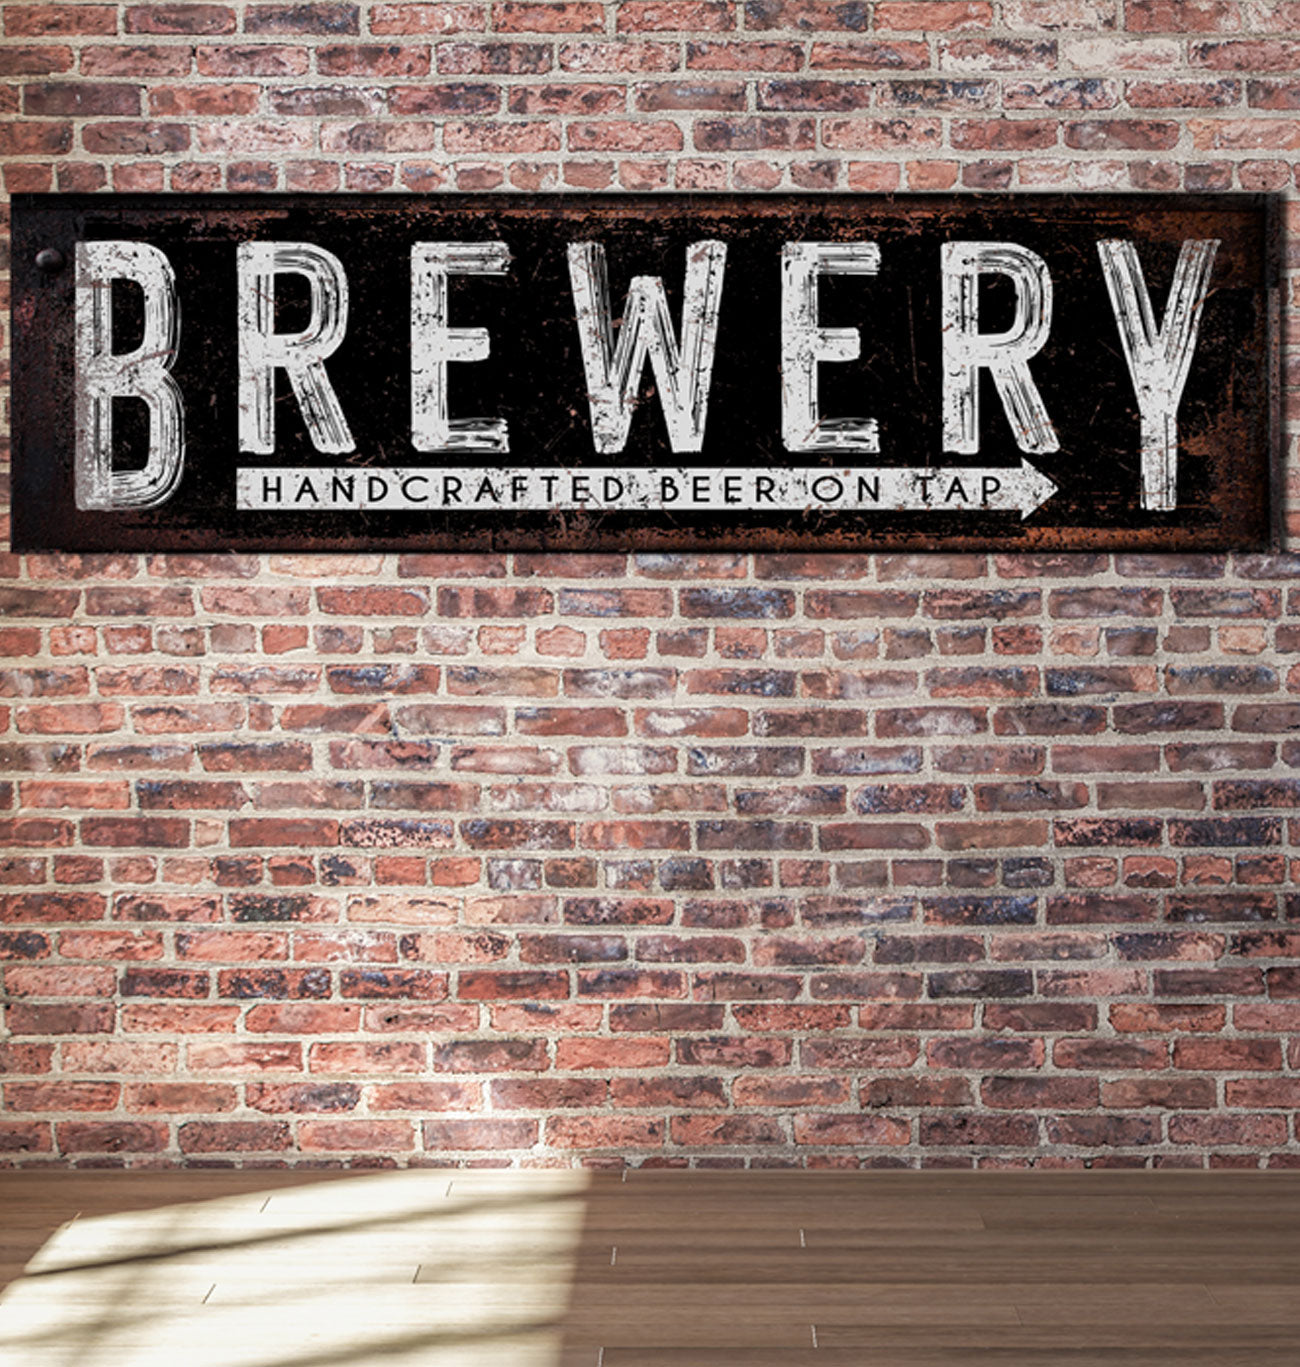 Basement Bar sign that says Brewery in distressed black rusted background with big words "BREWERY" handcrafted beer on tap. Personalized with your name in white print.